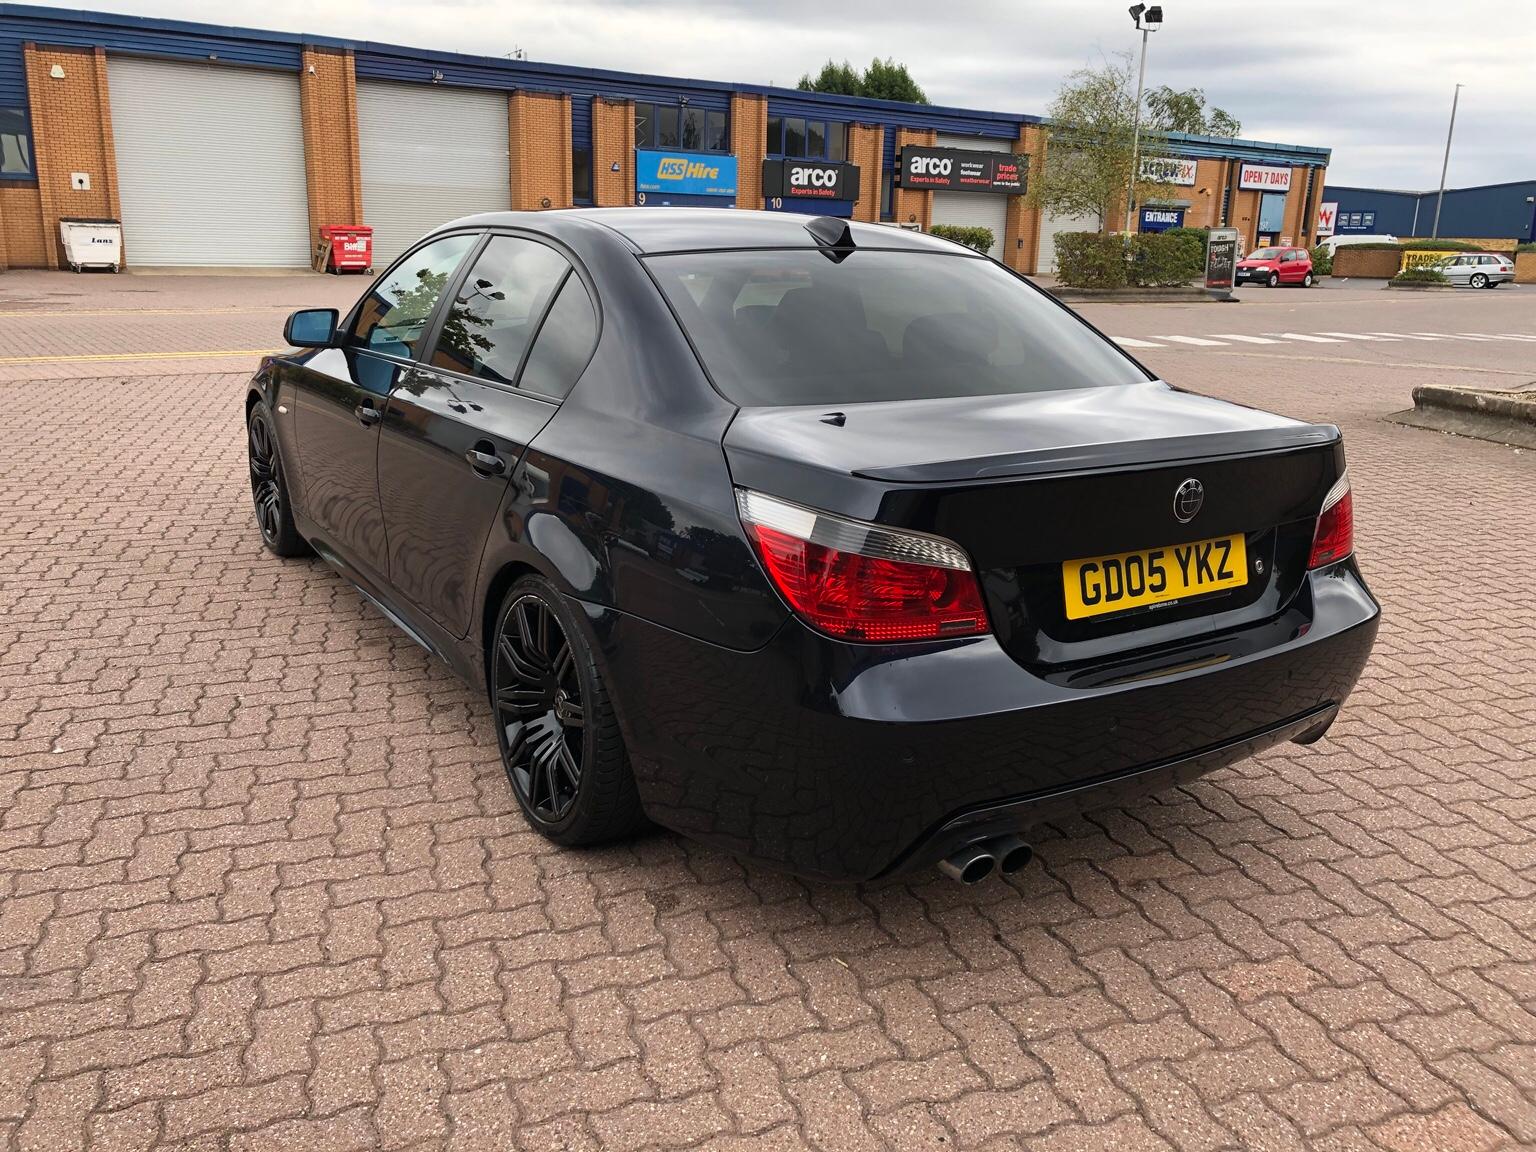 Bmw 535d e60 Msport remapped 370bhp in Slough for £5,500